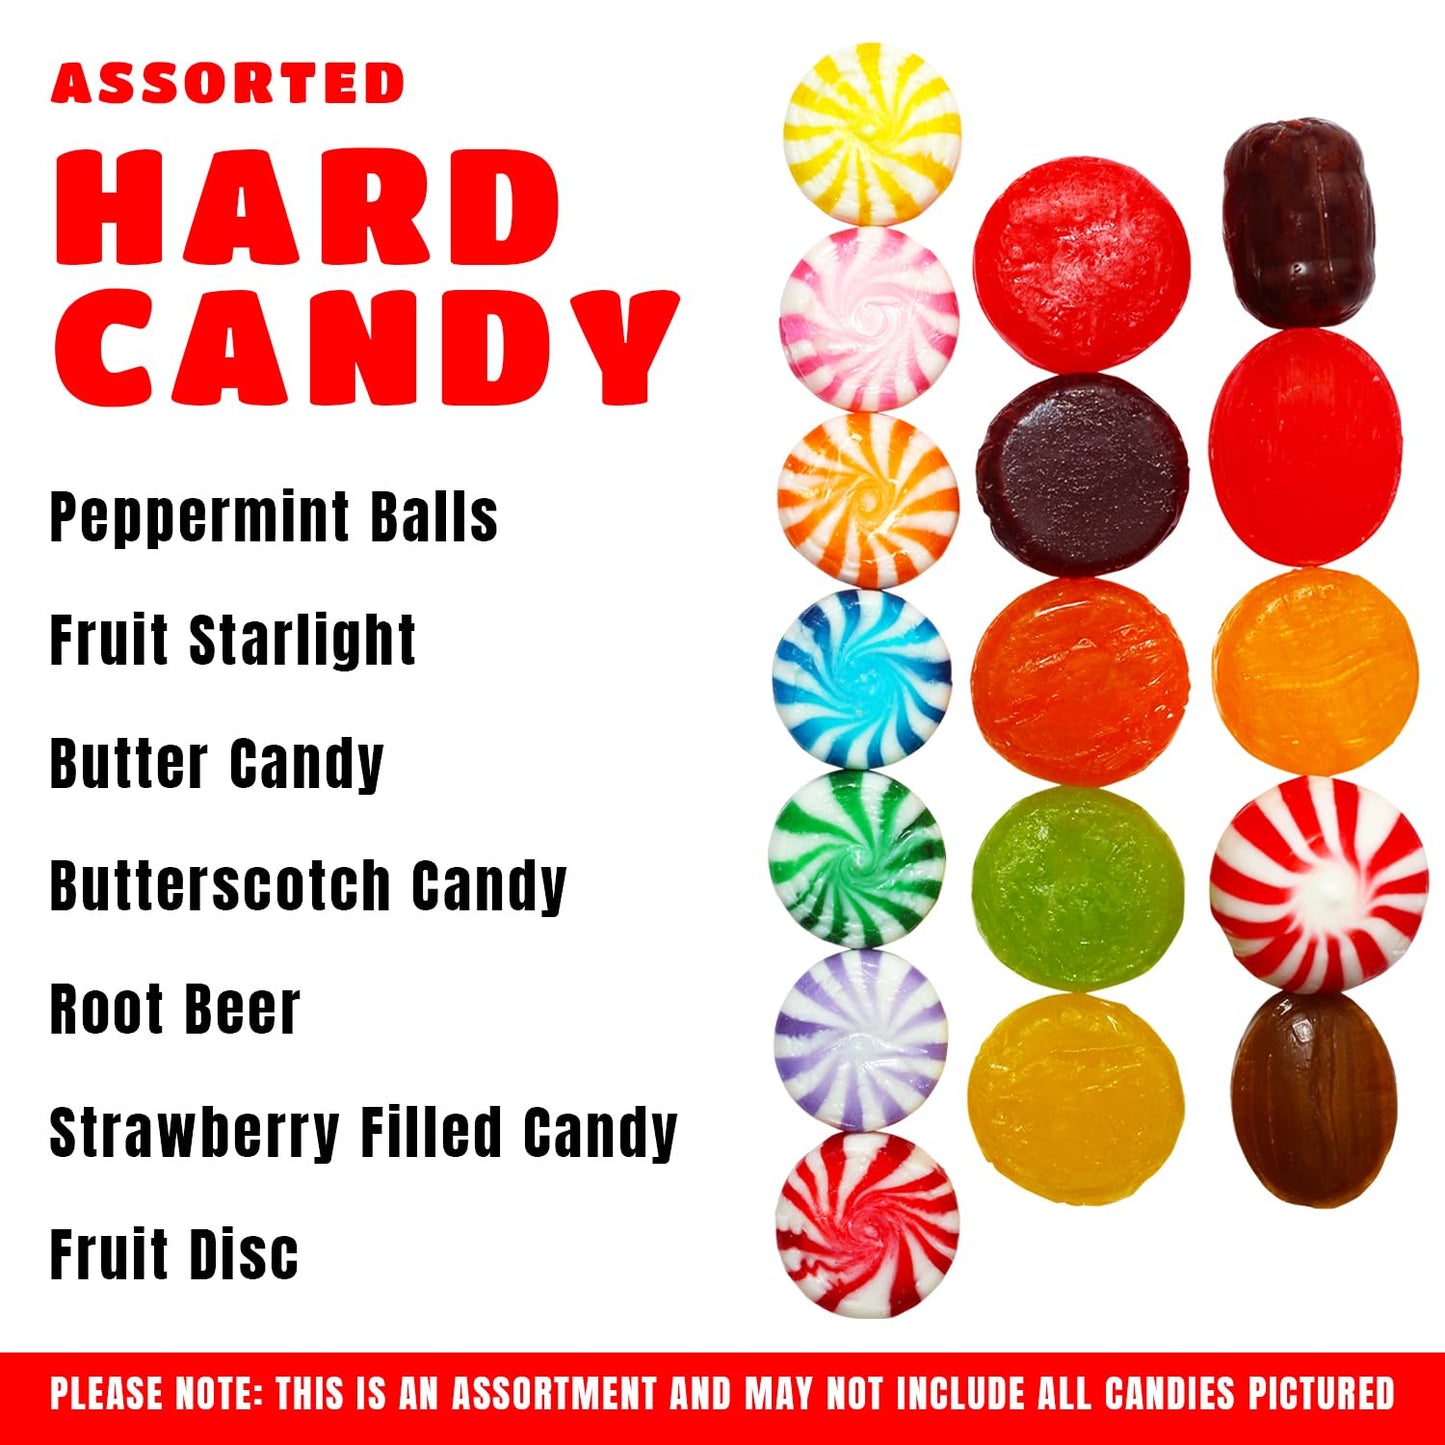 Hard Candy Mix - 3 LB Bulk Variety Candy Bag - Assorted Classic Hard Candy - Large Candy Bag for Office, Party Favor Filler - Individually Wrapped Hard Candy - Mint, Starlight, Toffee, Butterscotch, Strawberry and More